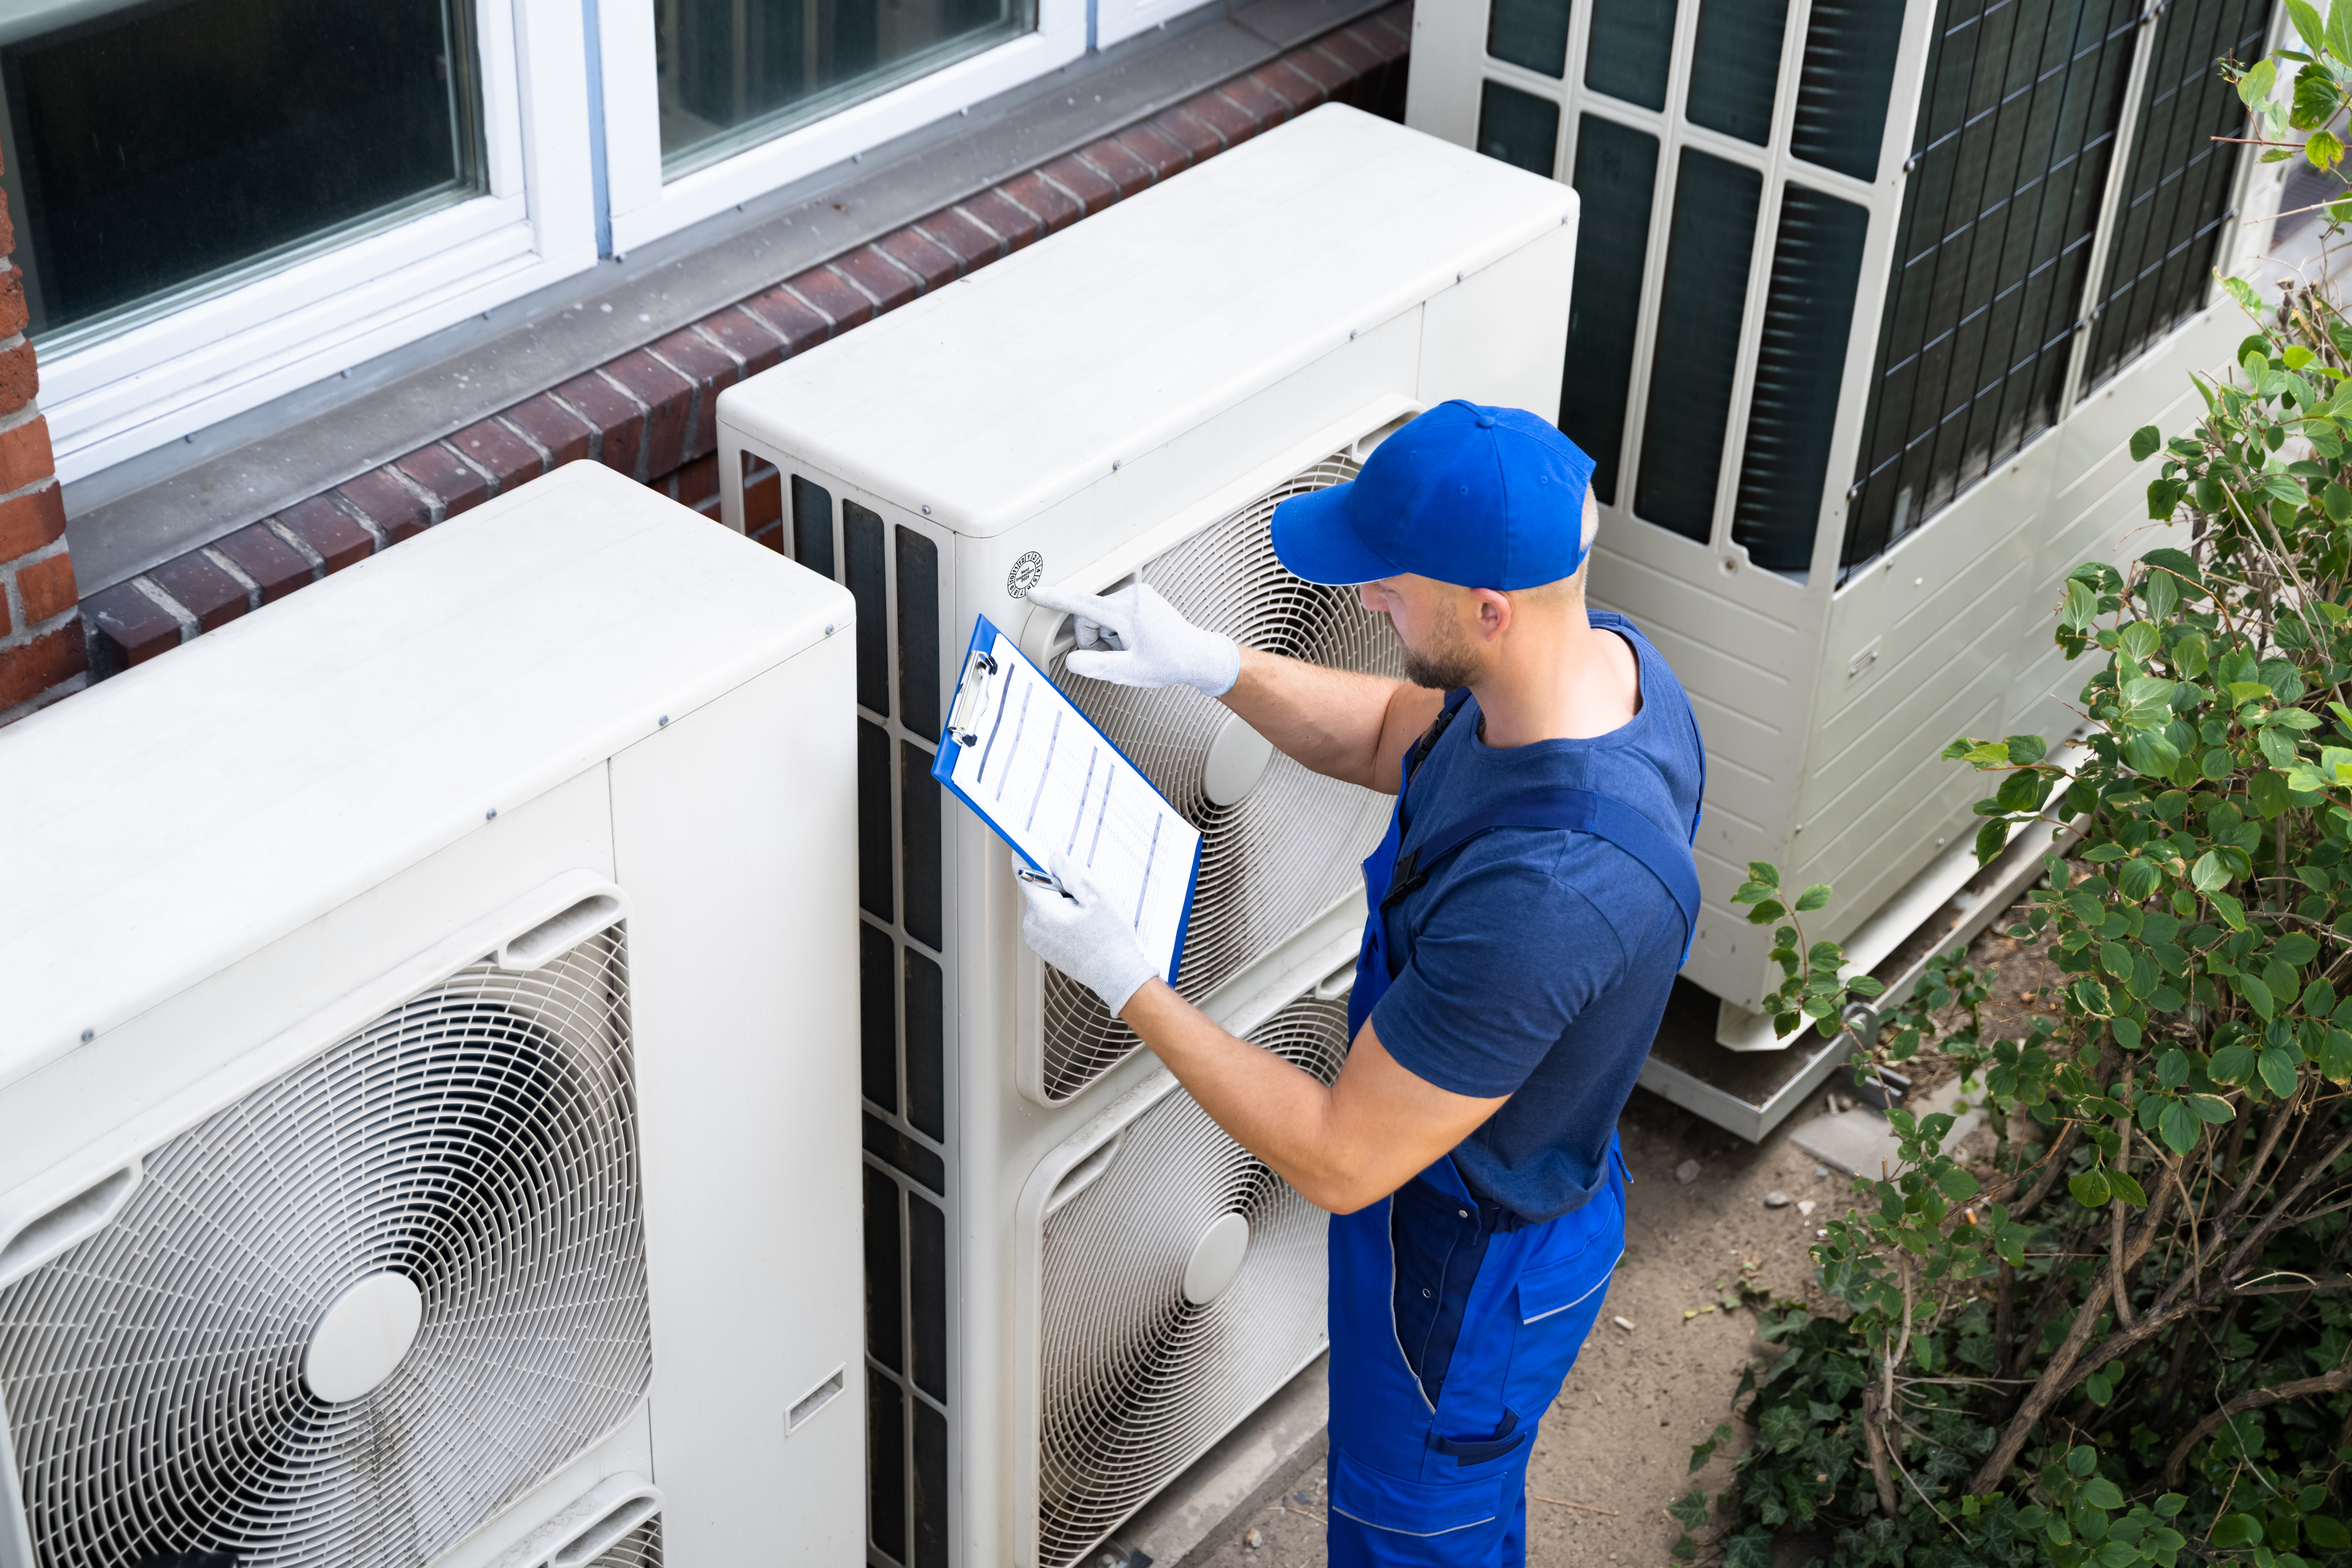 A male worker in a blue uniform uses a checklist and clipboard to perform preventive maintenance on commercial HVAC equipment outdoors. 